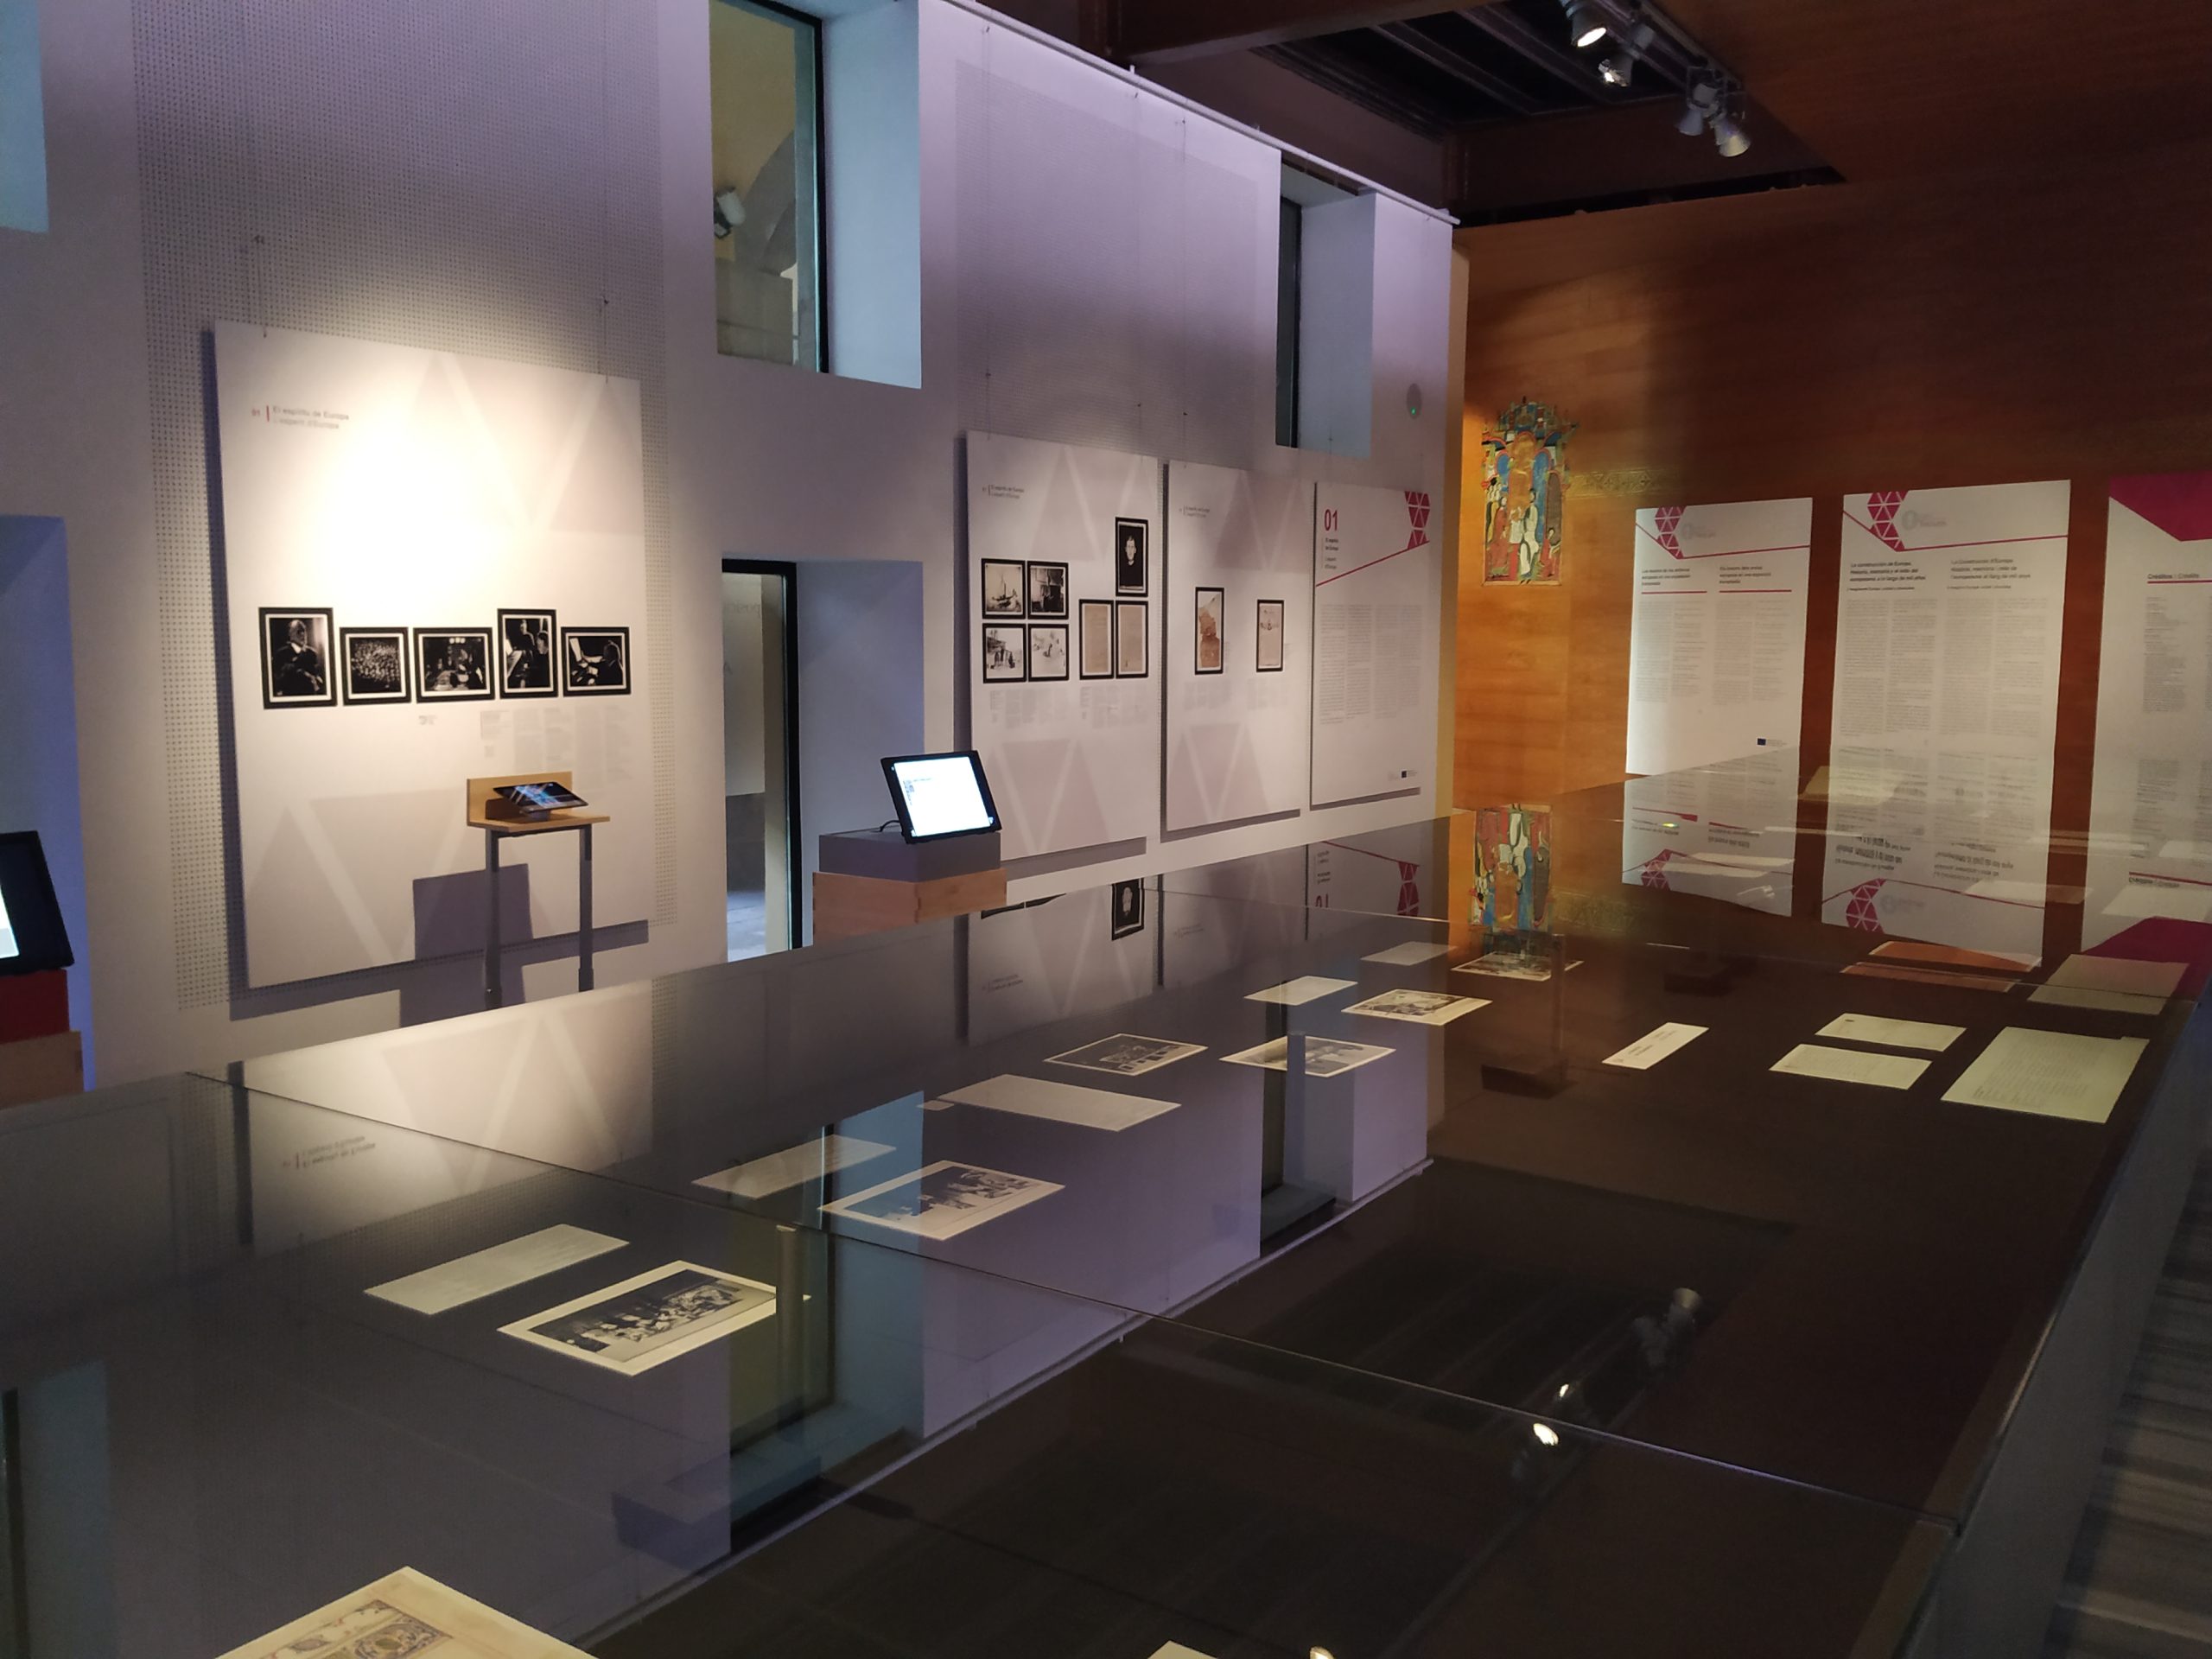 Exhibition opening at the Archive of the Crown of Aragon, Spain